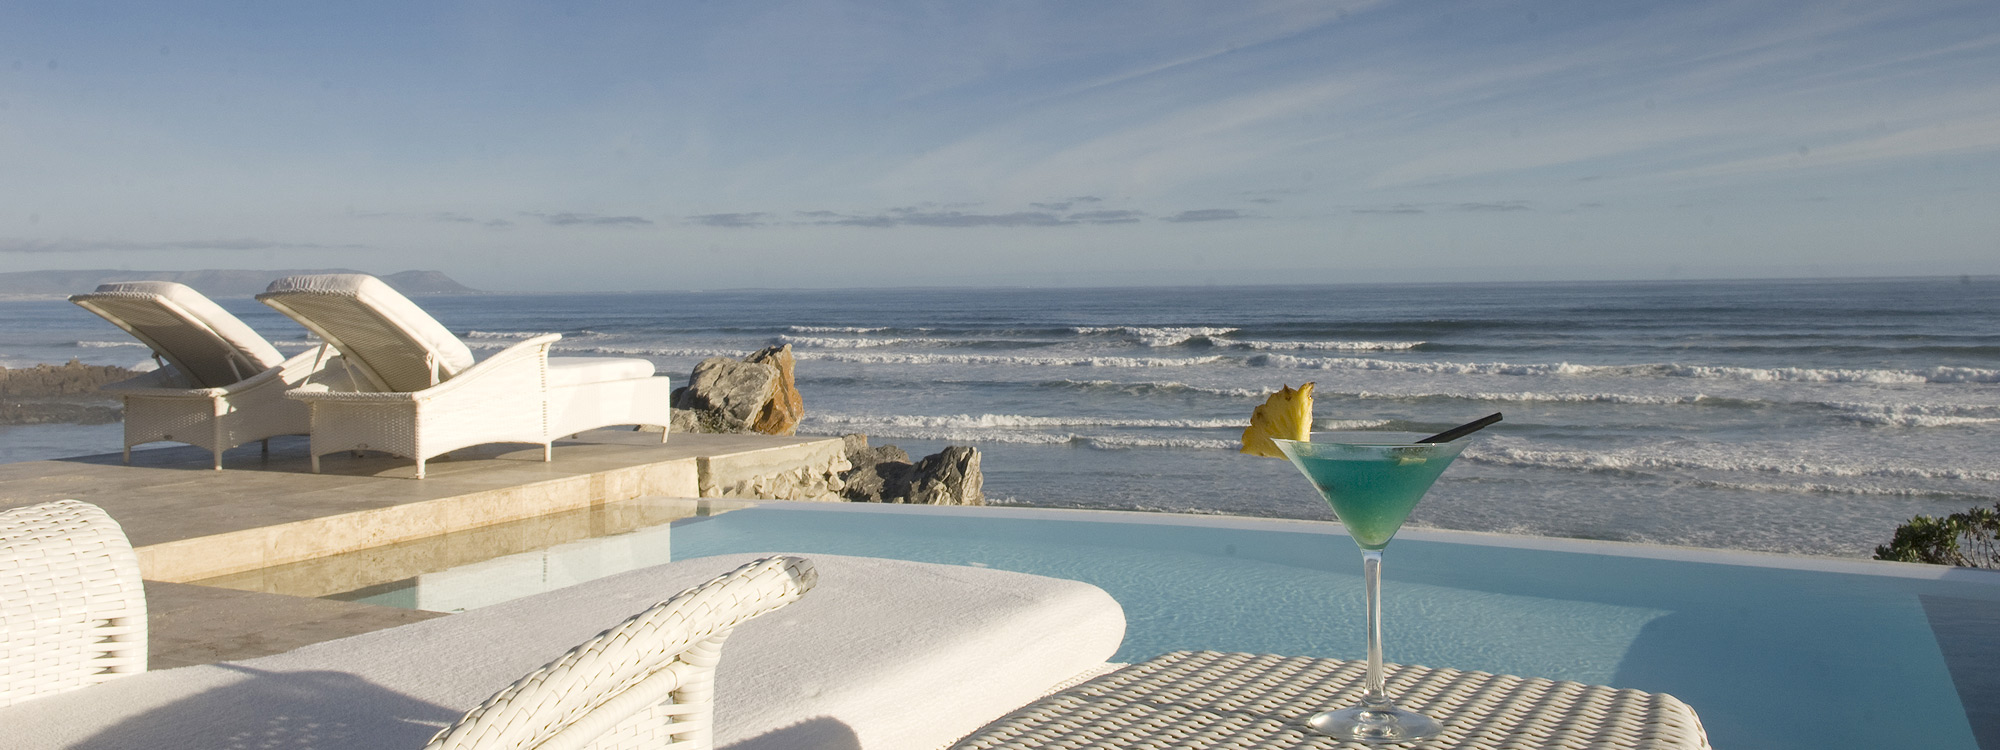 Patio View from Birkenhead House in Hermanus, South Africa